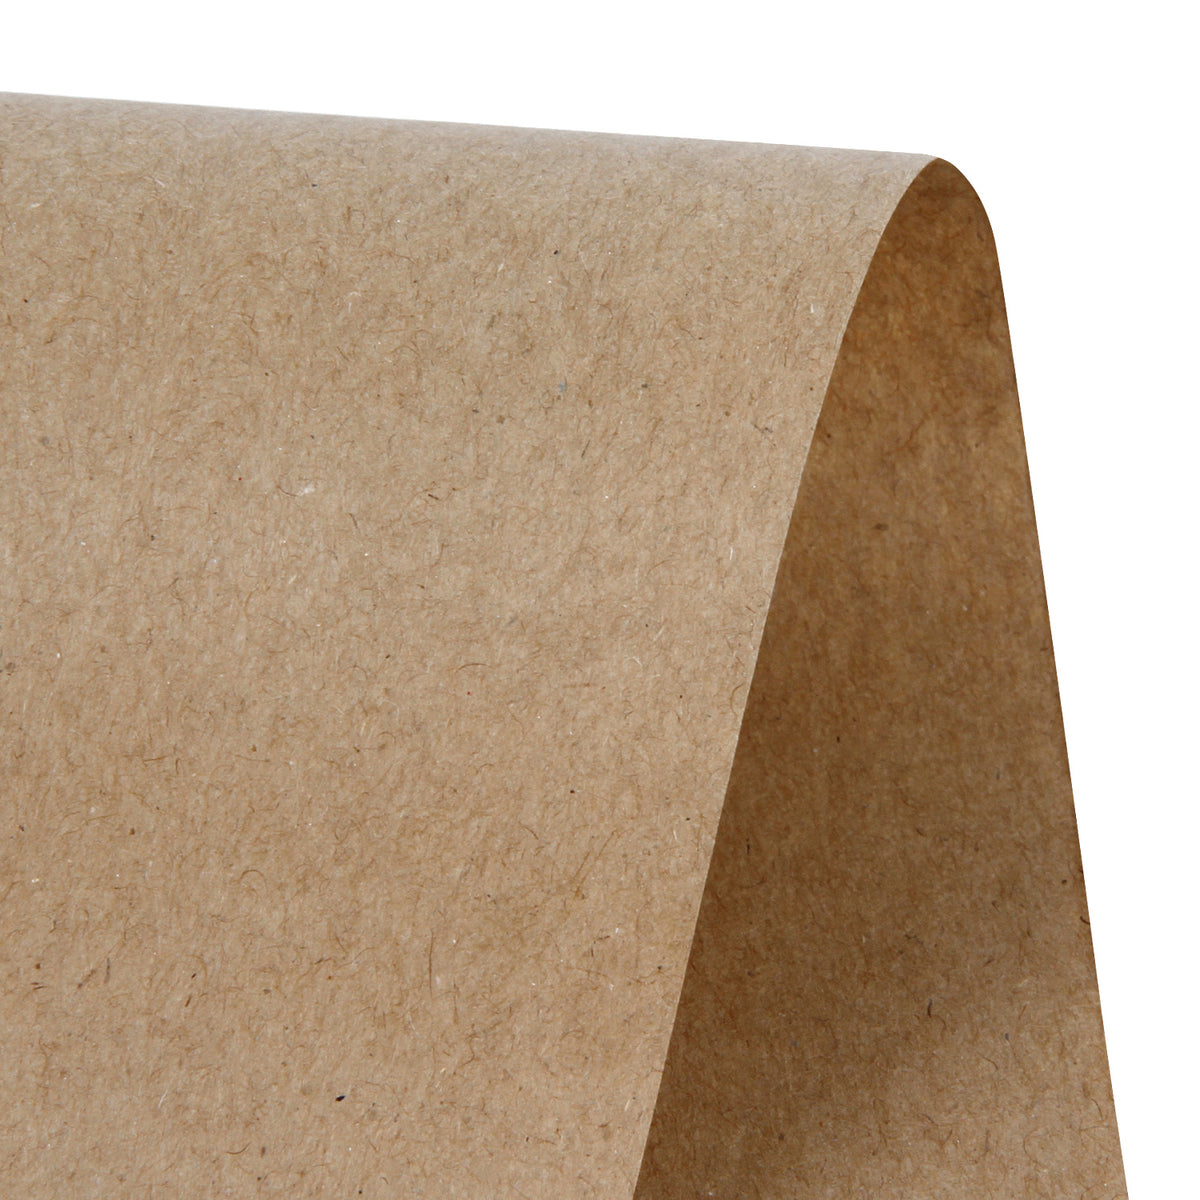 Brown Kraft Paper Roll - 36 Inch x 100 Feet - Recycled Paper Perfect f